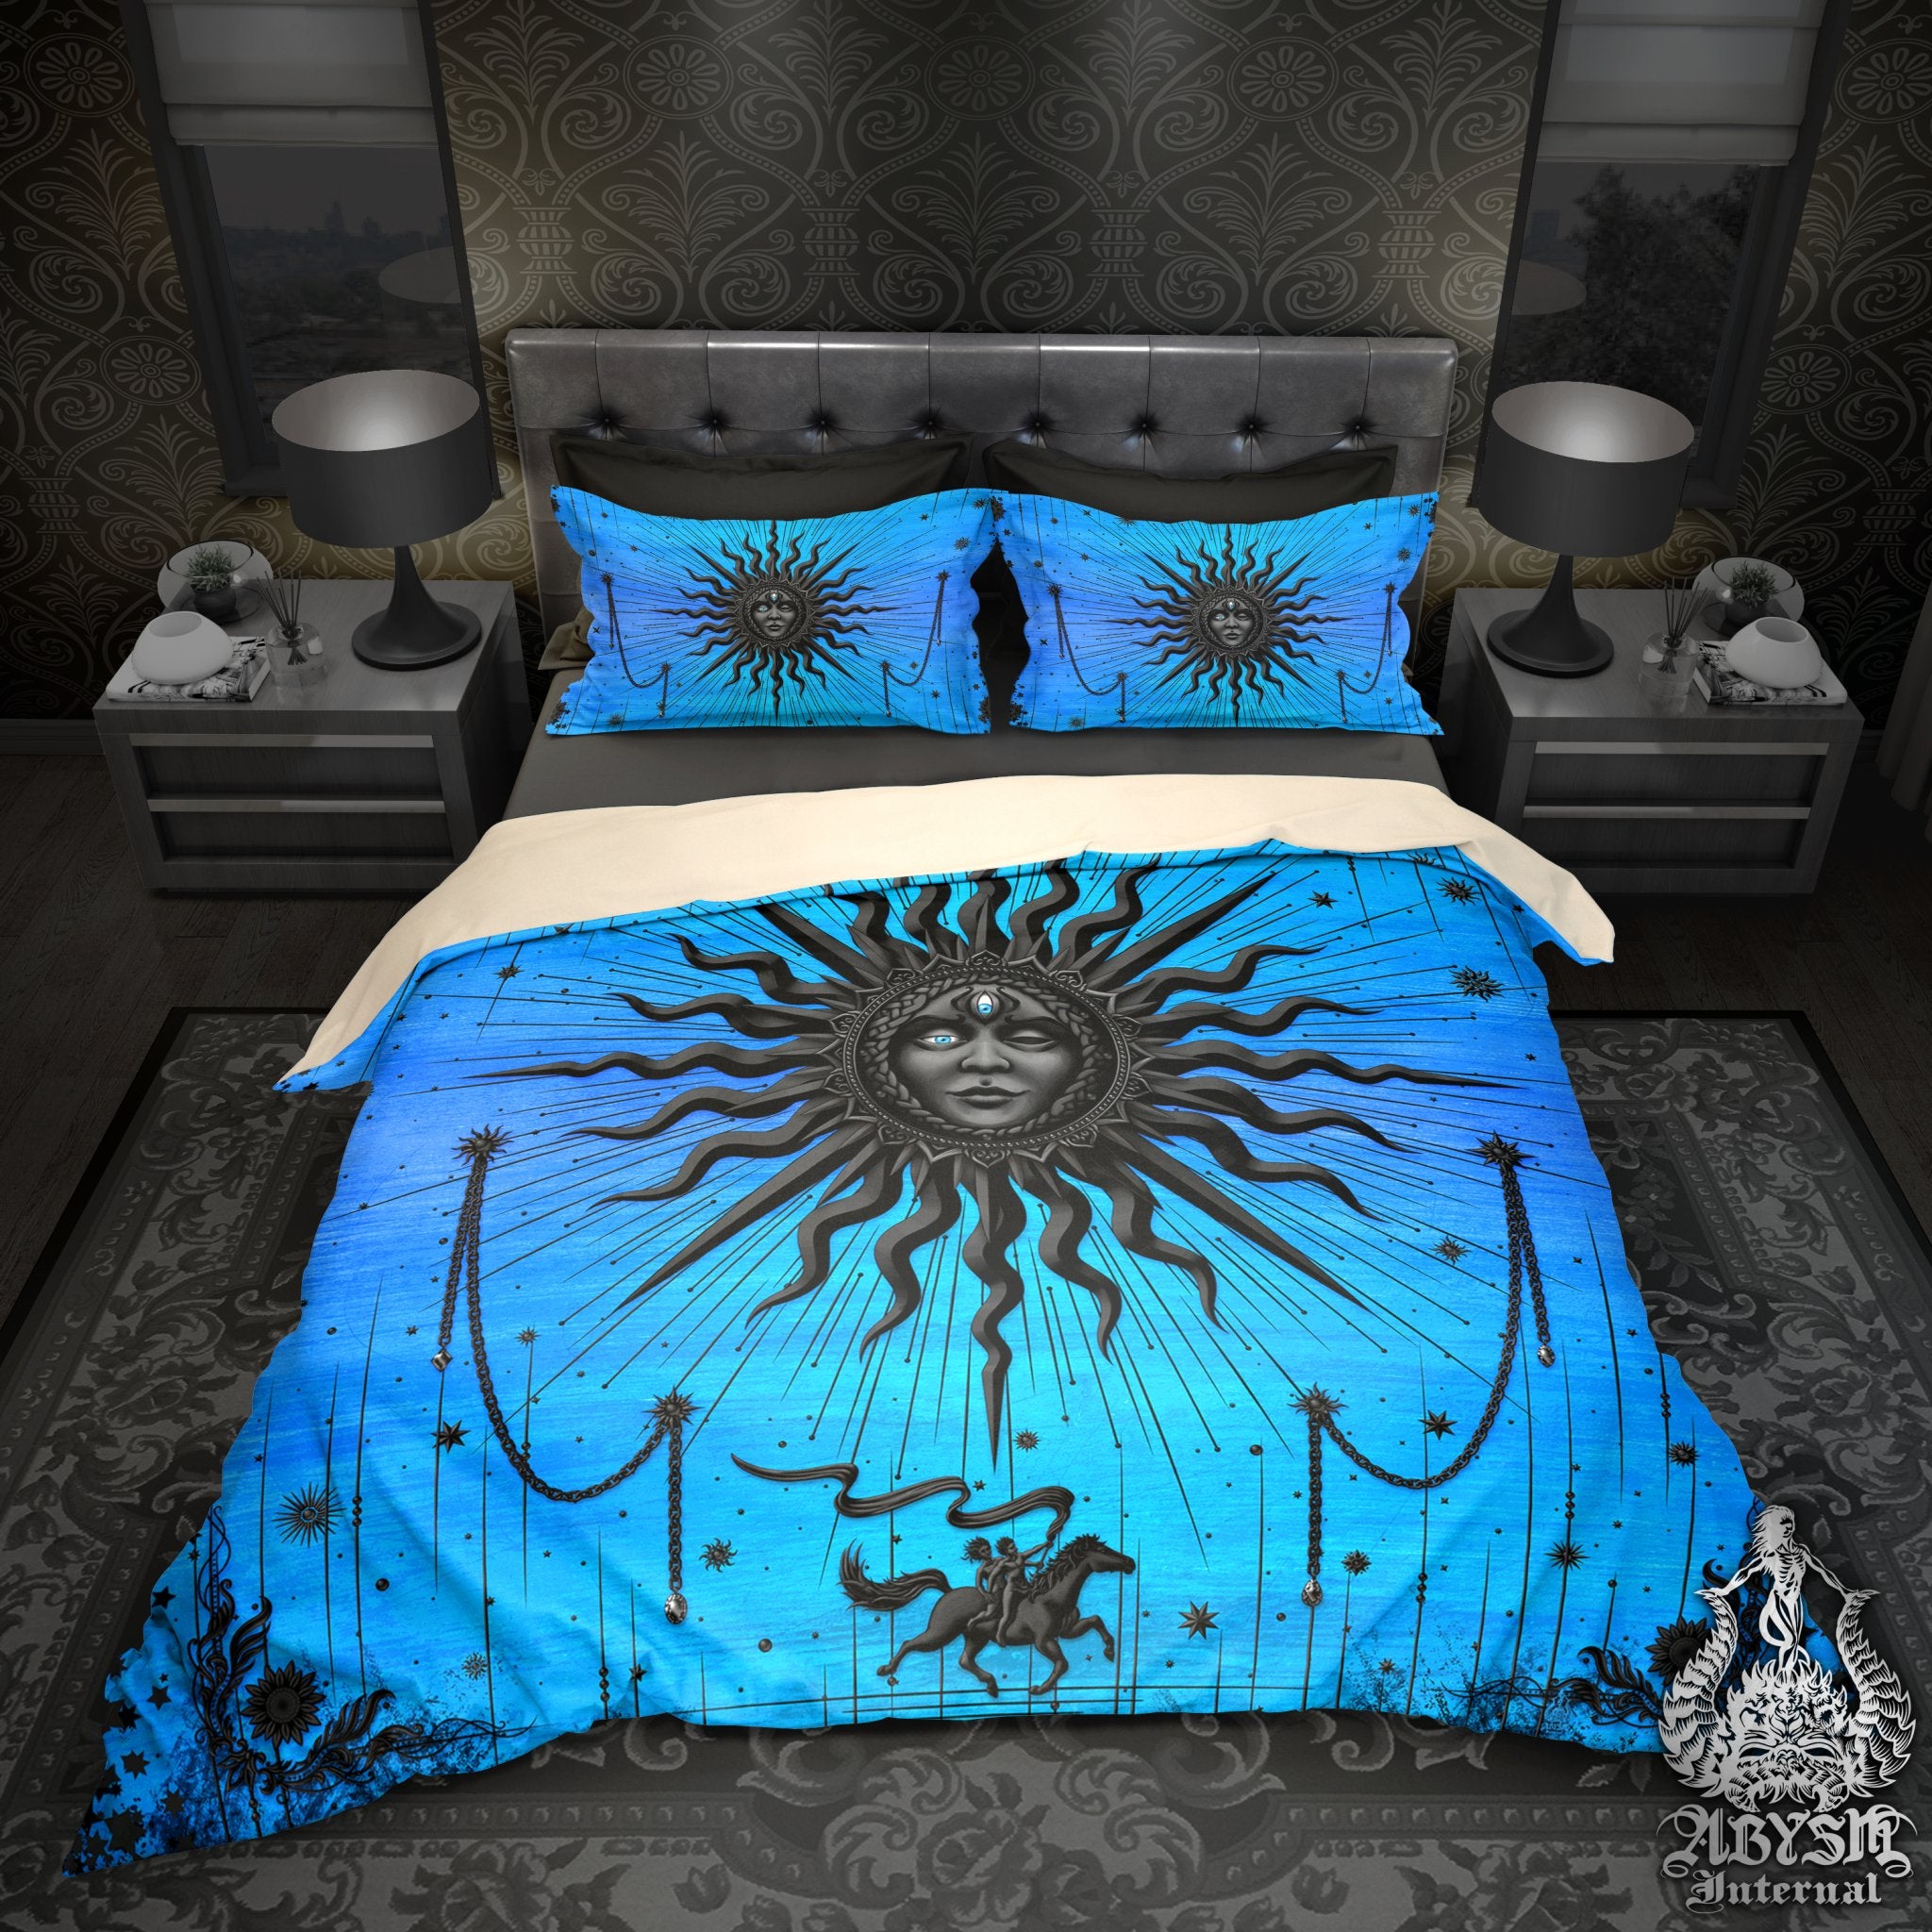 Black Sun Duvet Cover, Bed Covering, Witchy Comforter, Esoteric Bedroom Decor King, Queen & Twin Bedding Set - Tarot Arcana Art, Cyan - Abysm Internal